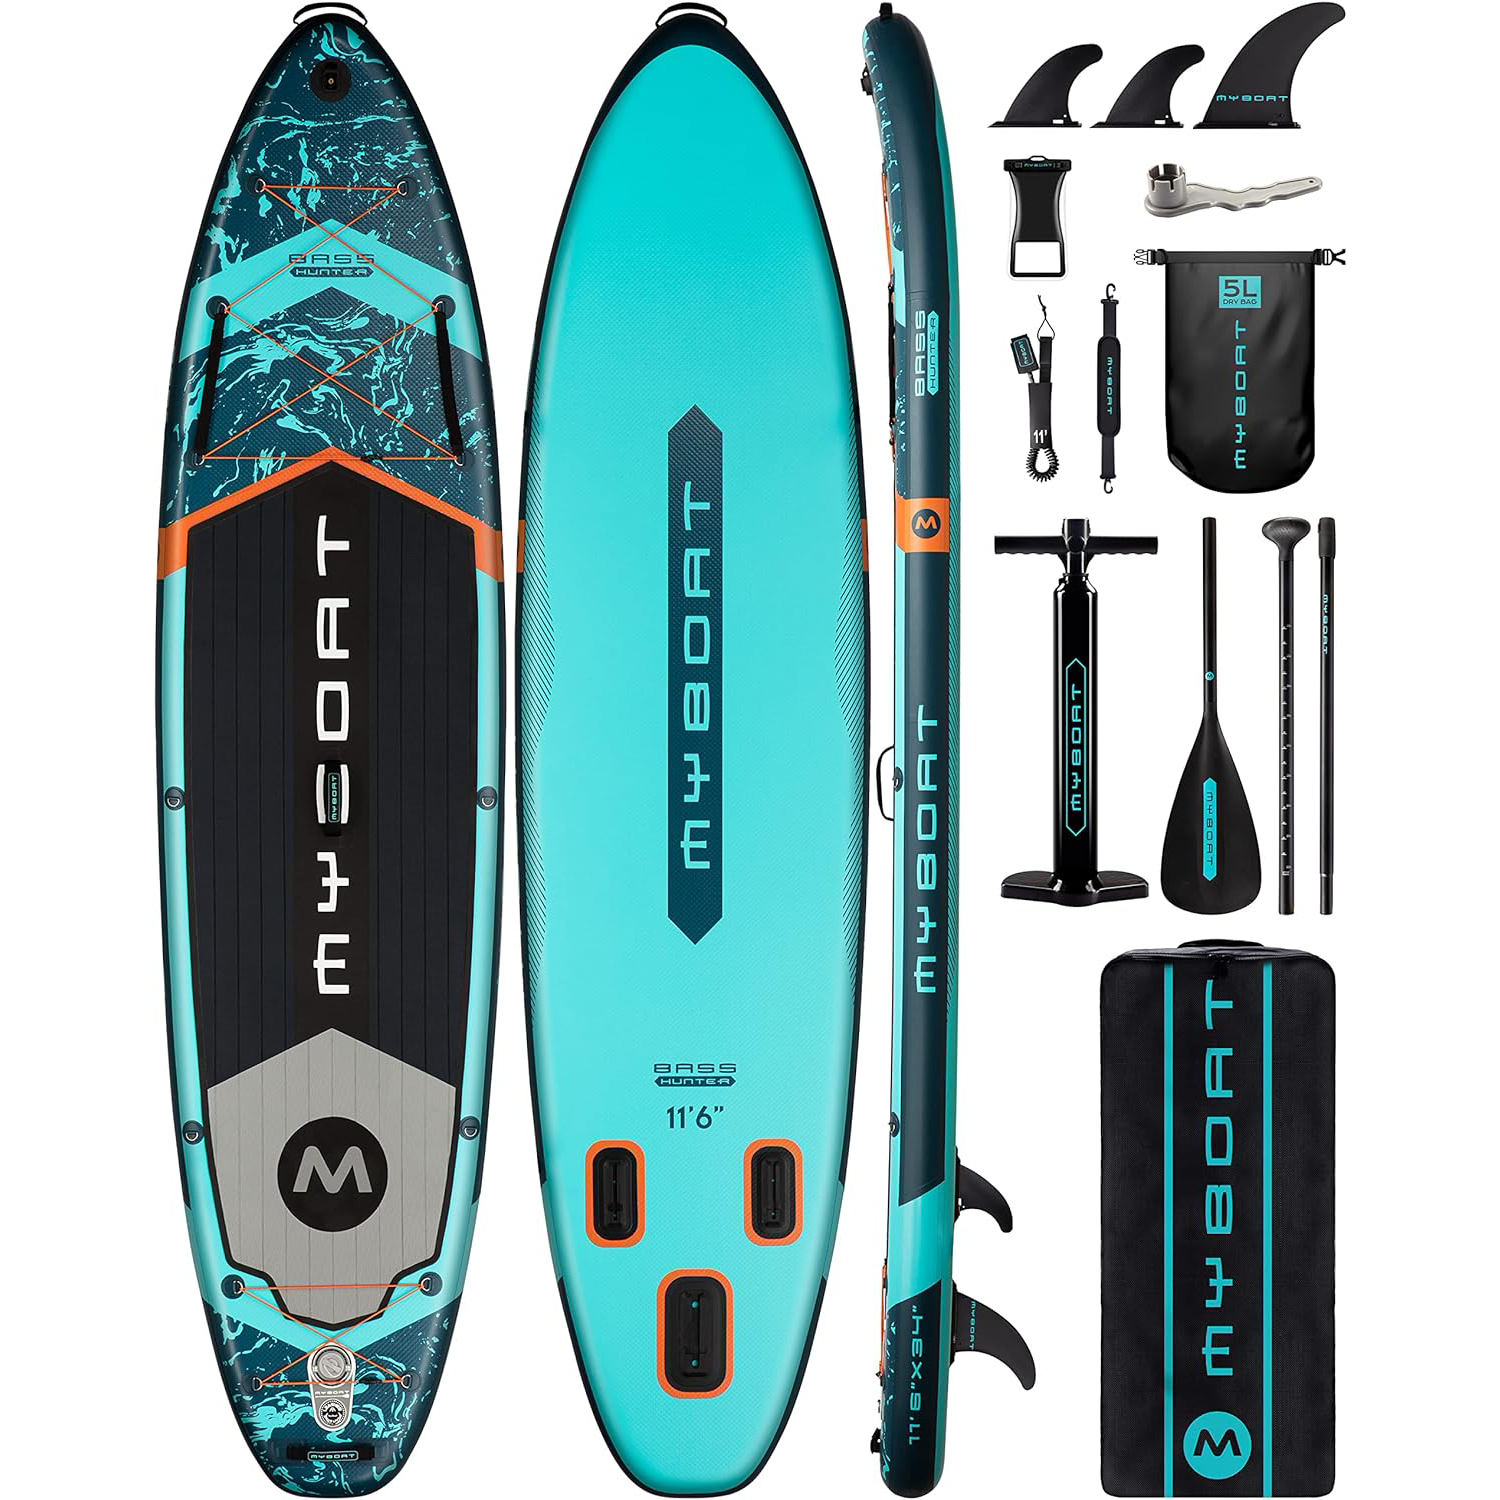 Extra Wide Inflatable Paddle Board, Stand Up Paddle Board for Fishing, Sup Board with 3 Removable Fins